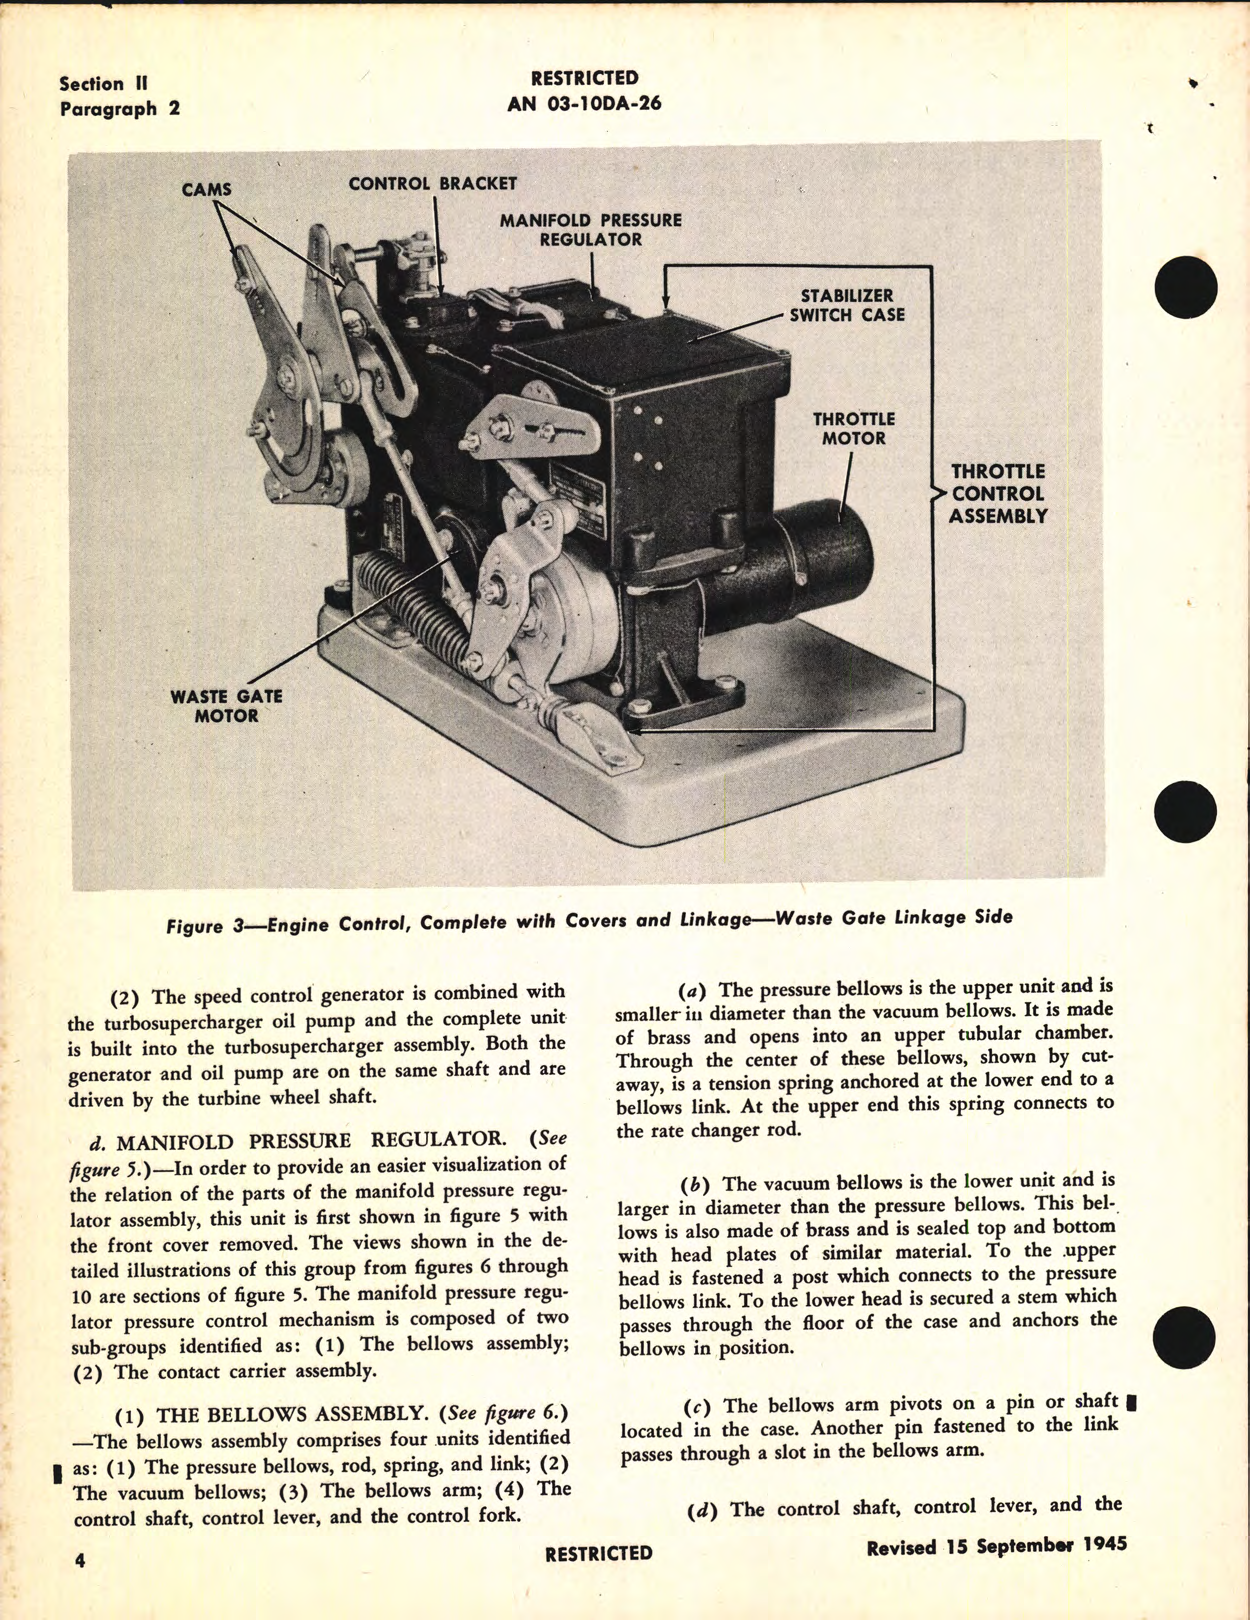 Sample page 8 from AirCorps Library document: Operation, Service, & Overhaul Instructions with Parts Catalog for Automatic Engine Control Type C-1 Model 3GPC1A1